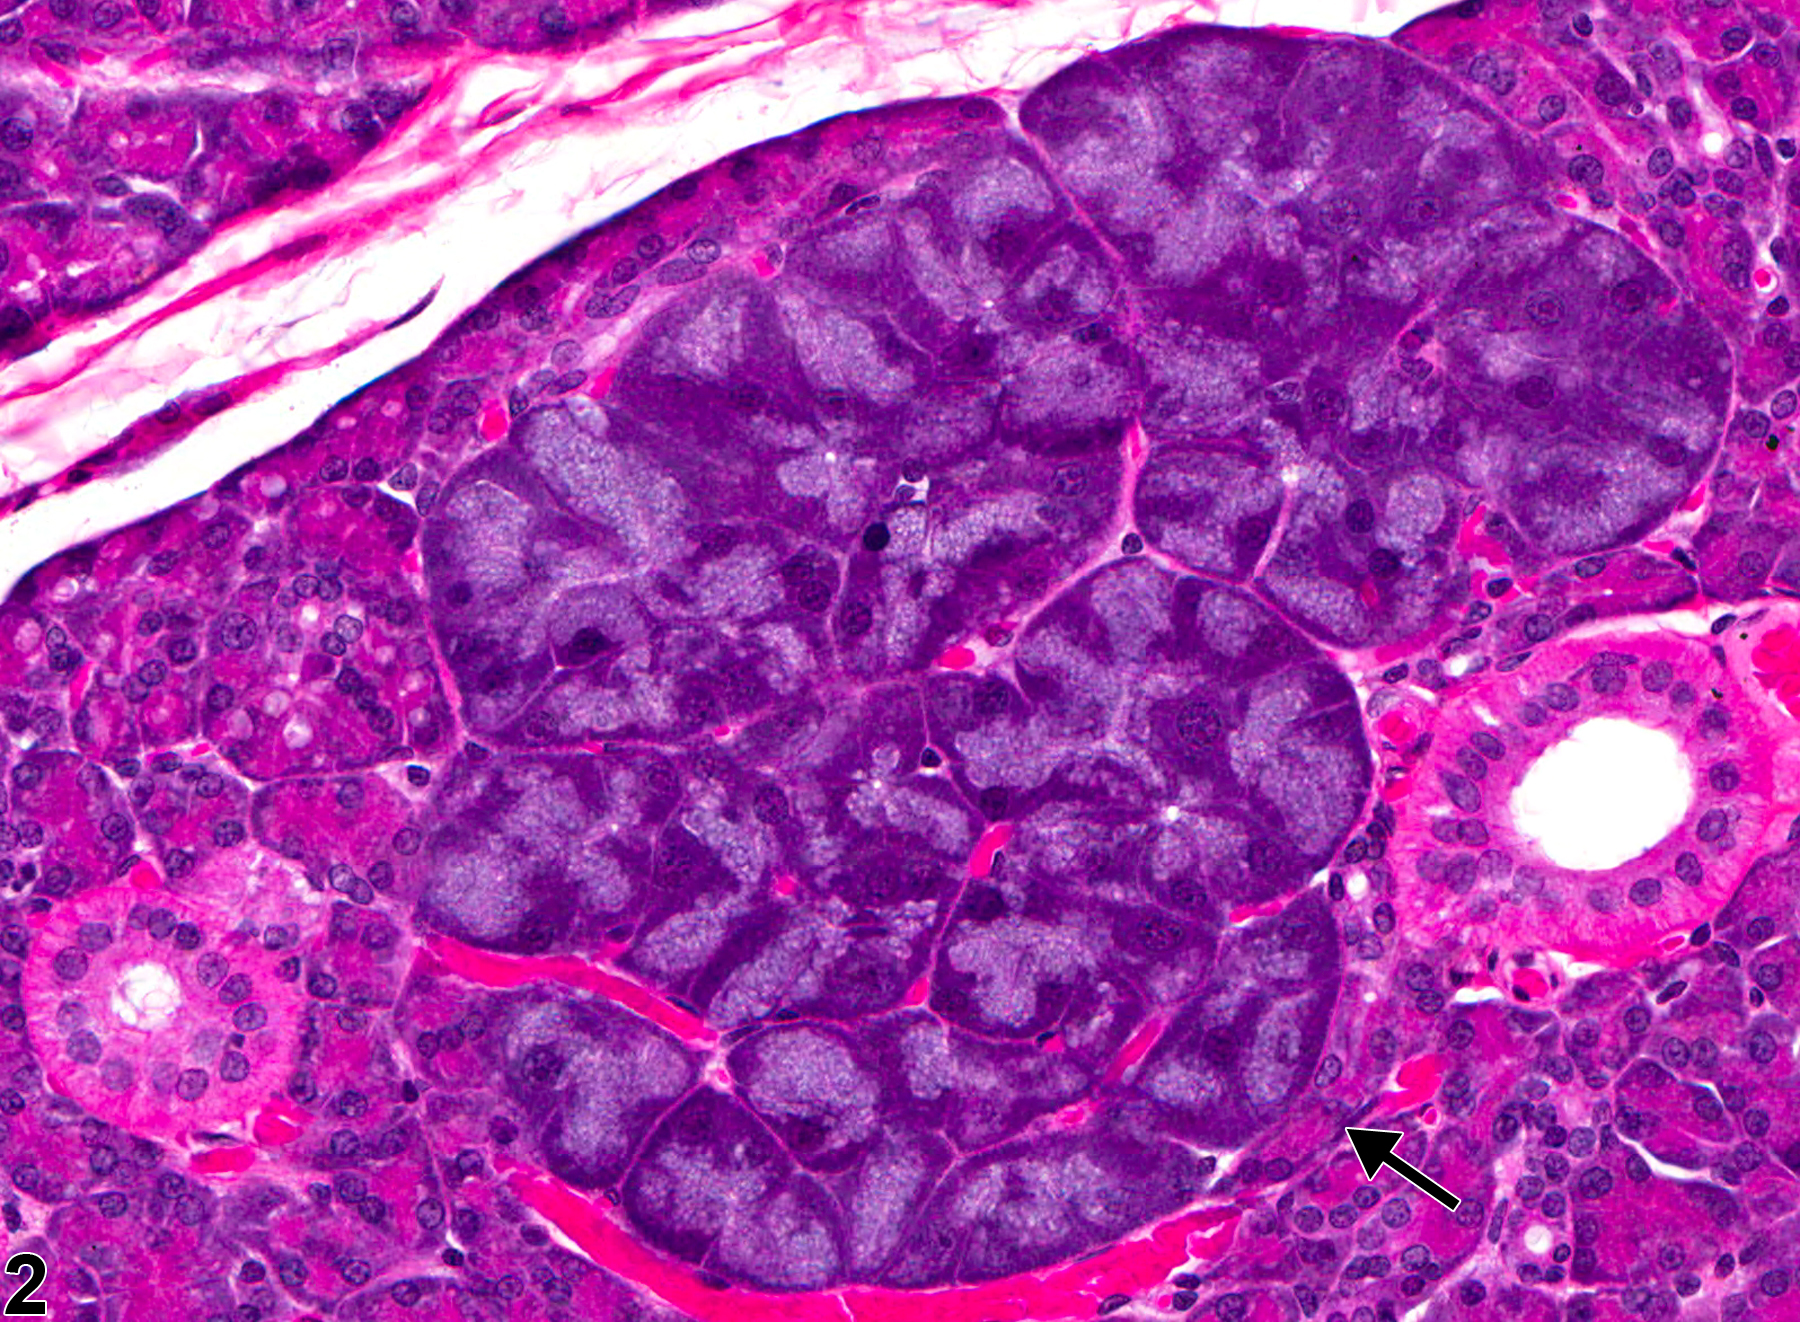 Image of basophilic hypertrophic focus in the parotid salivary gland from a female F344/N rat in a chronic study